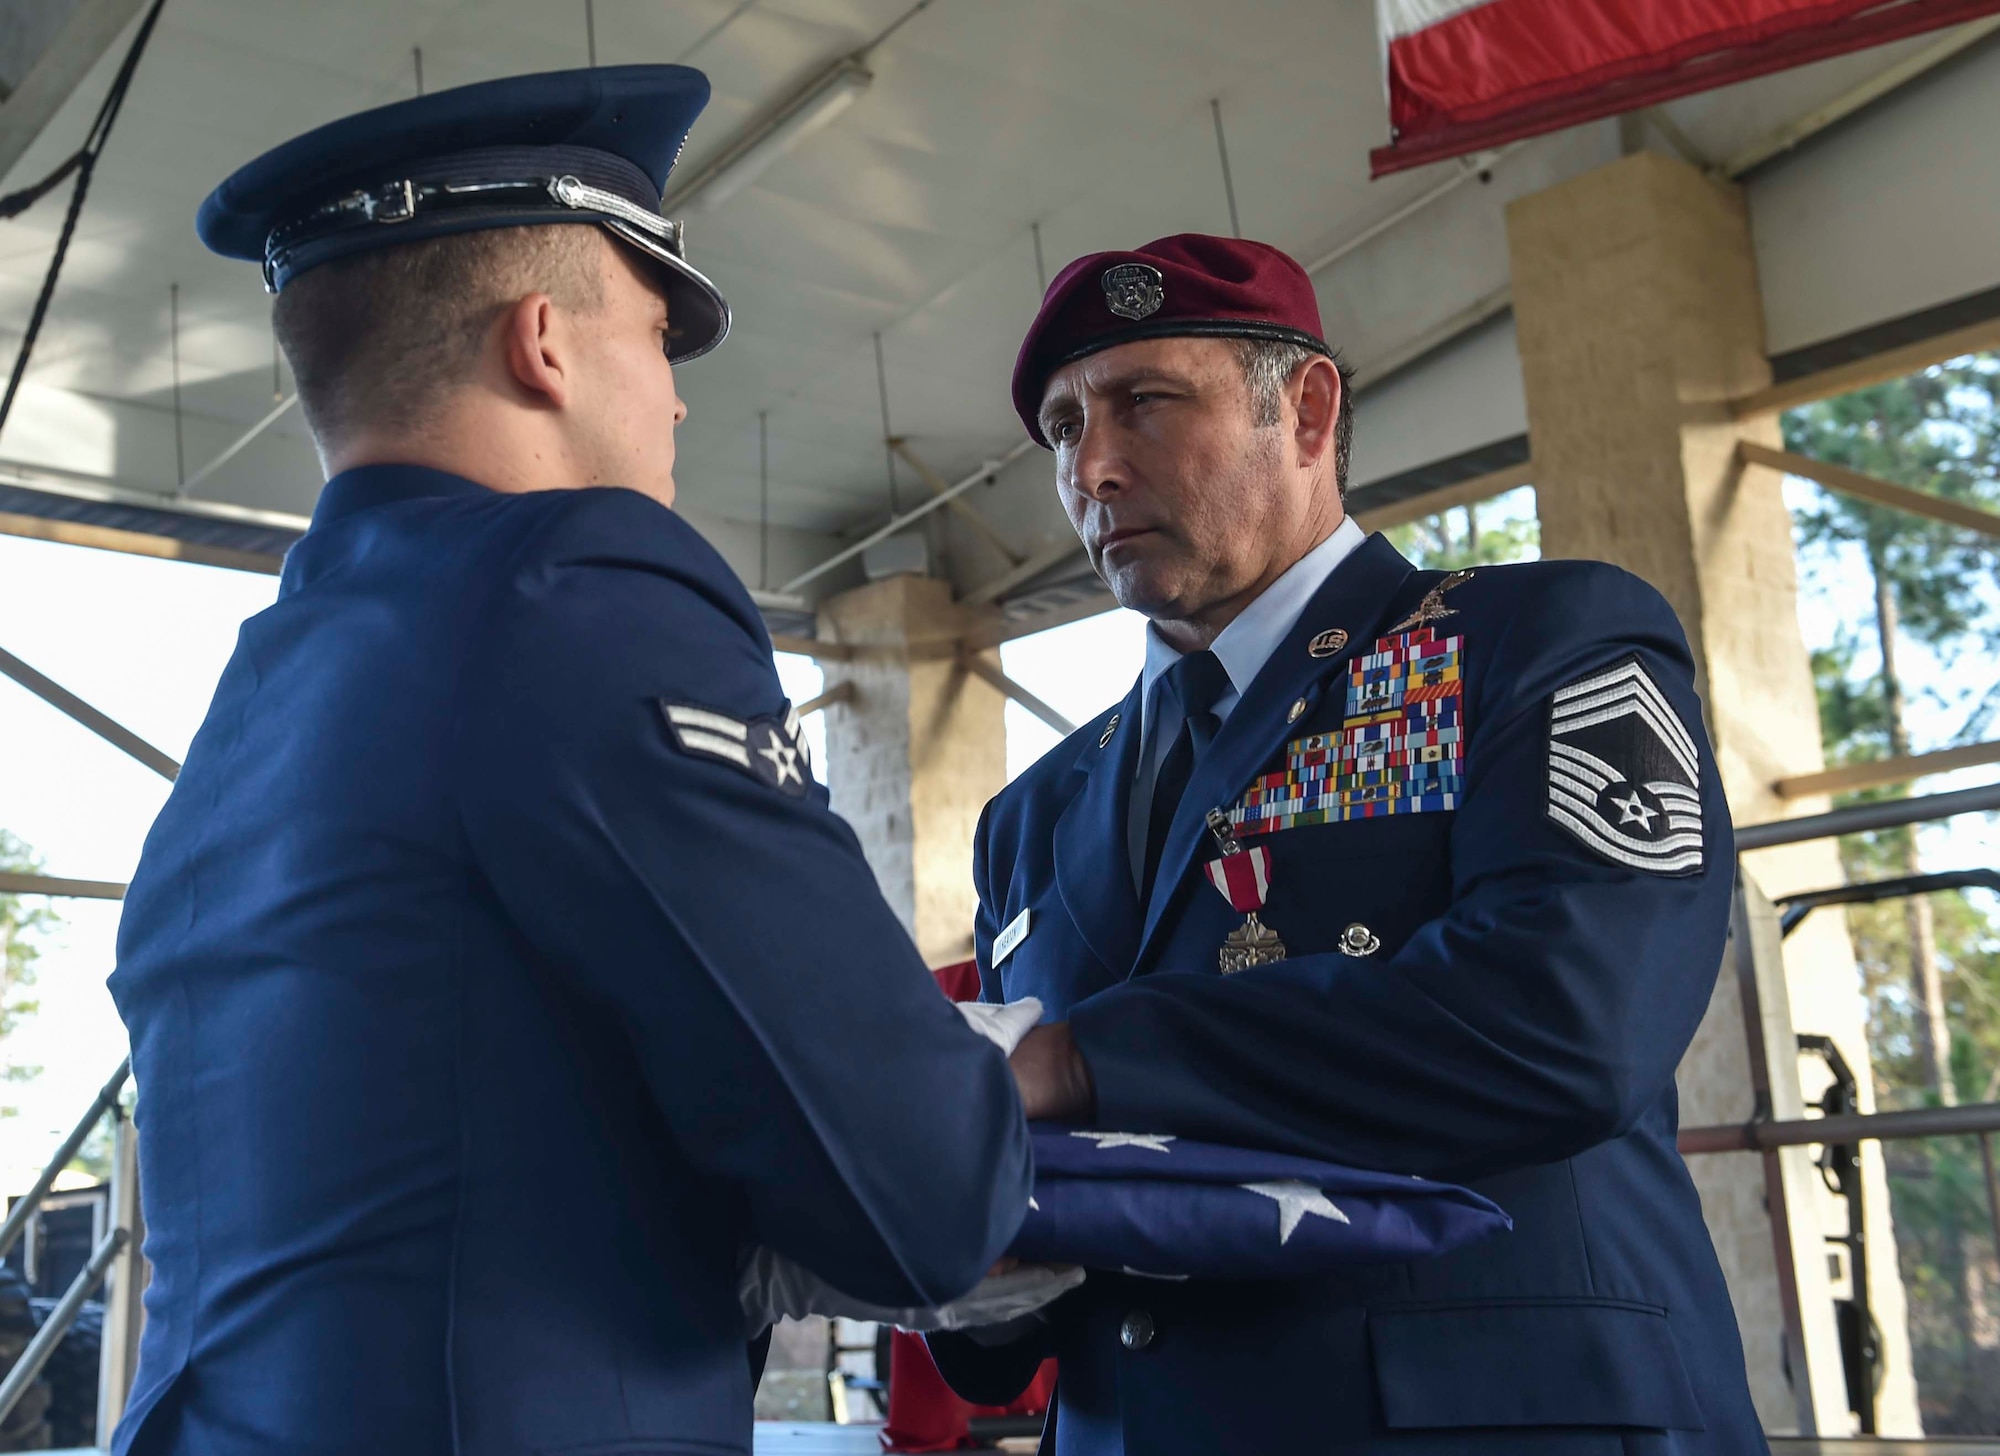 Chief Master Sgt. Davide Keaton, 26th Special Tactics Squadron superintendent, receives a folded flag from the Hurlburt Field Honor Guard during his retirement ceremony at Hurlburt Field, Fla., Jan. 12, 2017. Keaton served in the Air Force for 30 years as a law enforcement specialist and pararescueman. (U.S. Air Force photo by Senior Airman Ryan Conroy) 